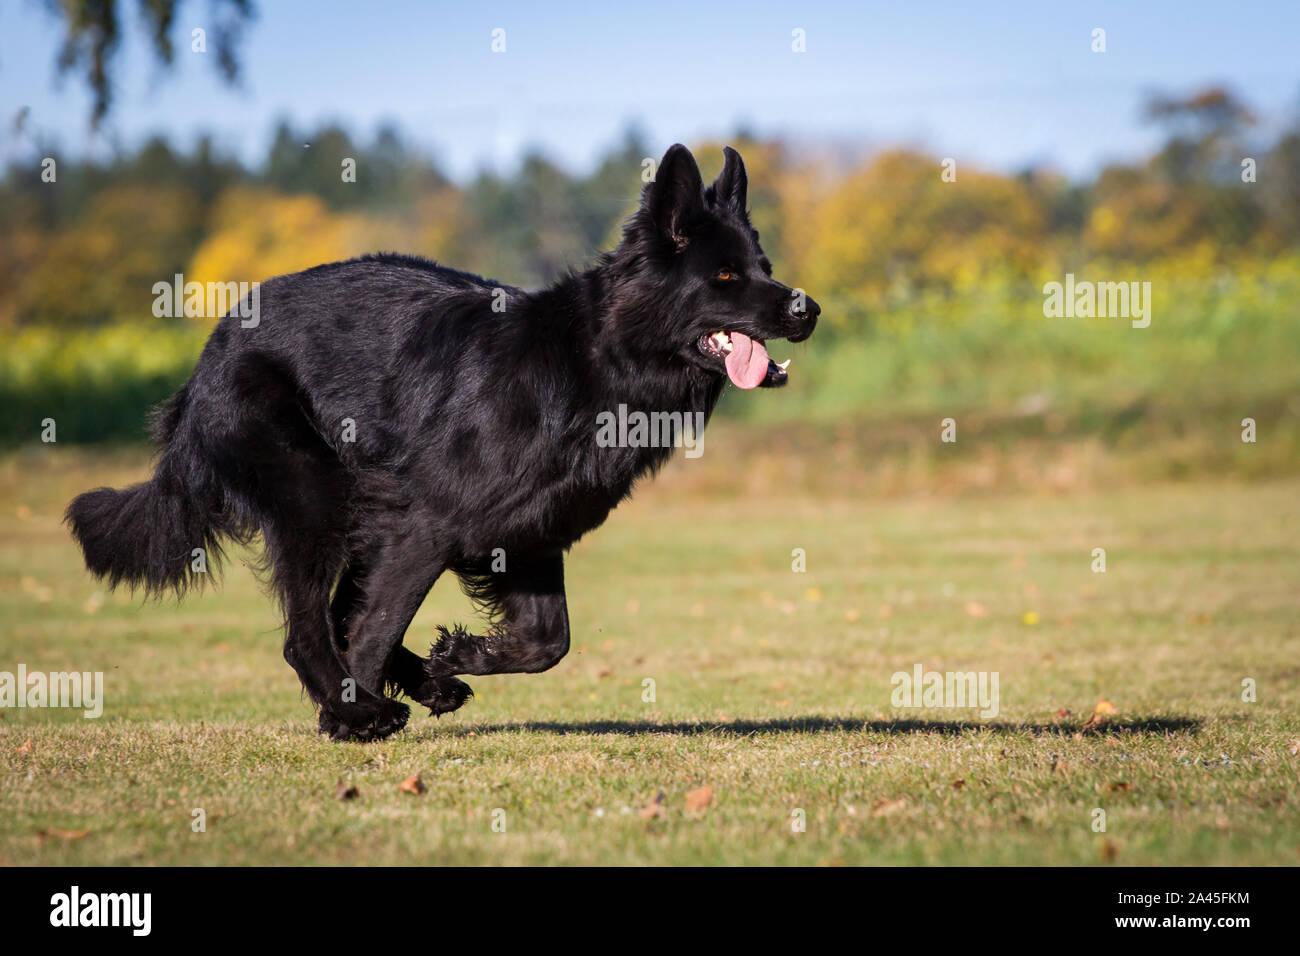 Black Old German Shepherd Dog female running, photographed from the side Stock Photo